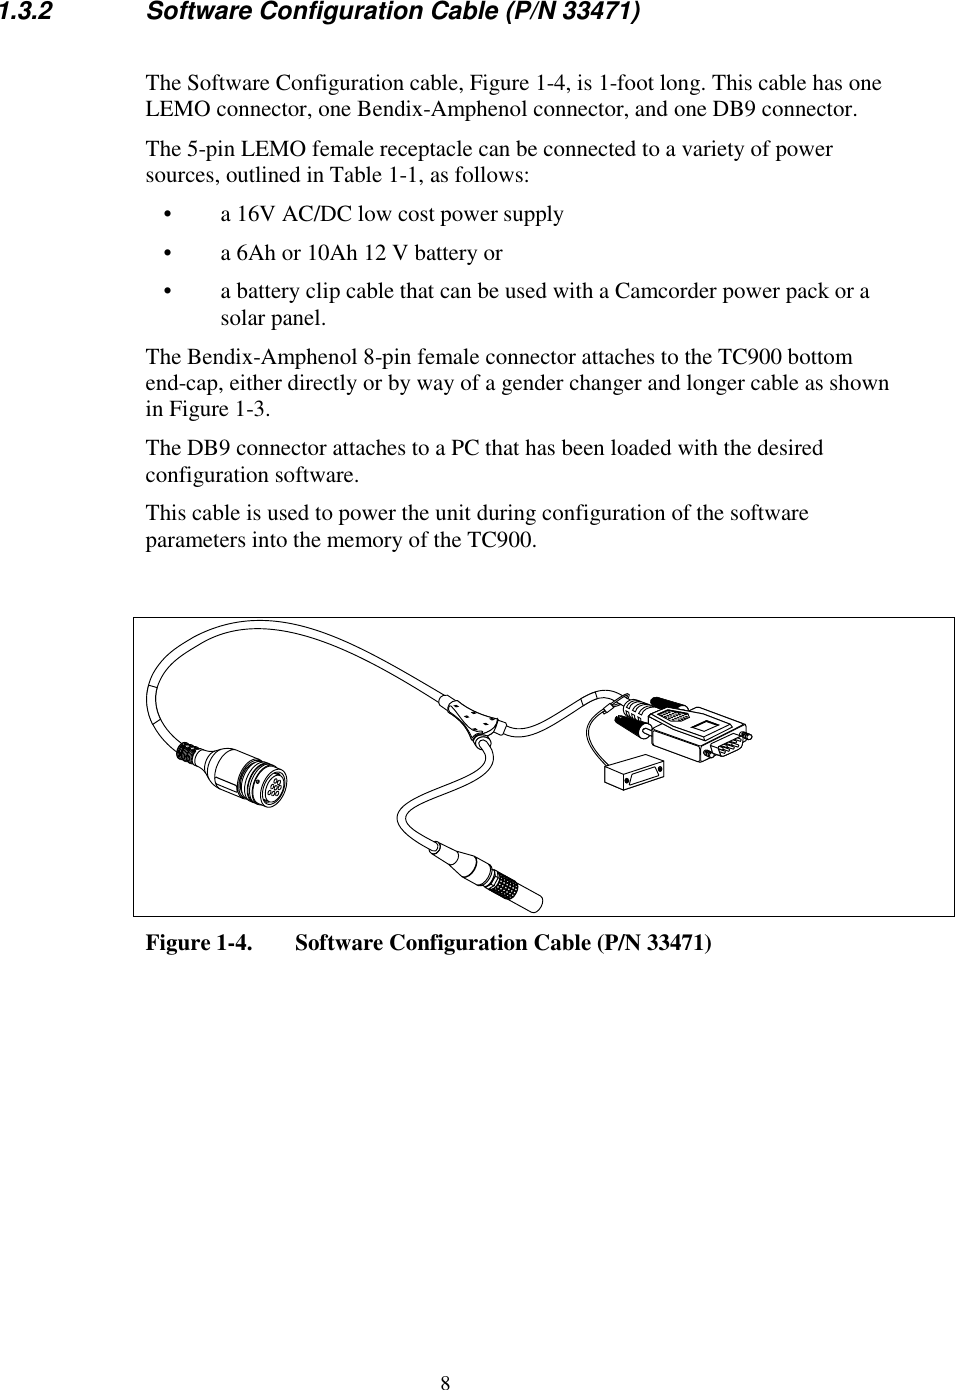 81.3.2 Software Configuration Cable (P/N 33471)The Software Configuration cable, Figure 1-4, is 1-foot long. This cable has oneLEMO connector, one Bendix-Amphenol connector, and one DB9 connector.The 5-pin LEMO female receptacle can be connected to a variety of powersources, outlined in Table 1-1, as follows:•  a 16V AC/DC low cost power supply•  a 6Ah or 10Ah 12 V battery or•  a battery clip cable that can be used with a Camcorder power pack or asolar panel.The Bendix-Amphenol 8-pin female connector attaches to the TC900 bottomend-cap, either directly or by way of a gender changer and longer cable as shownin Figure 1-3.The DB9 connector attaches to a PC that has been loaded with the desiredconfiguration software.This cable is used to power the unit during configuration of the softwareparameters into the memory of the TC900.Figure 1-4. Software Configuration Cable (P/N 33471)